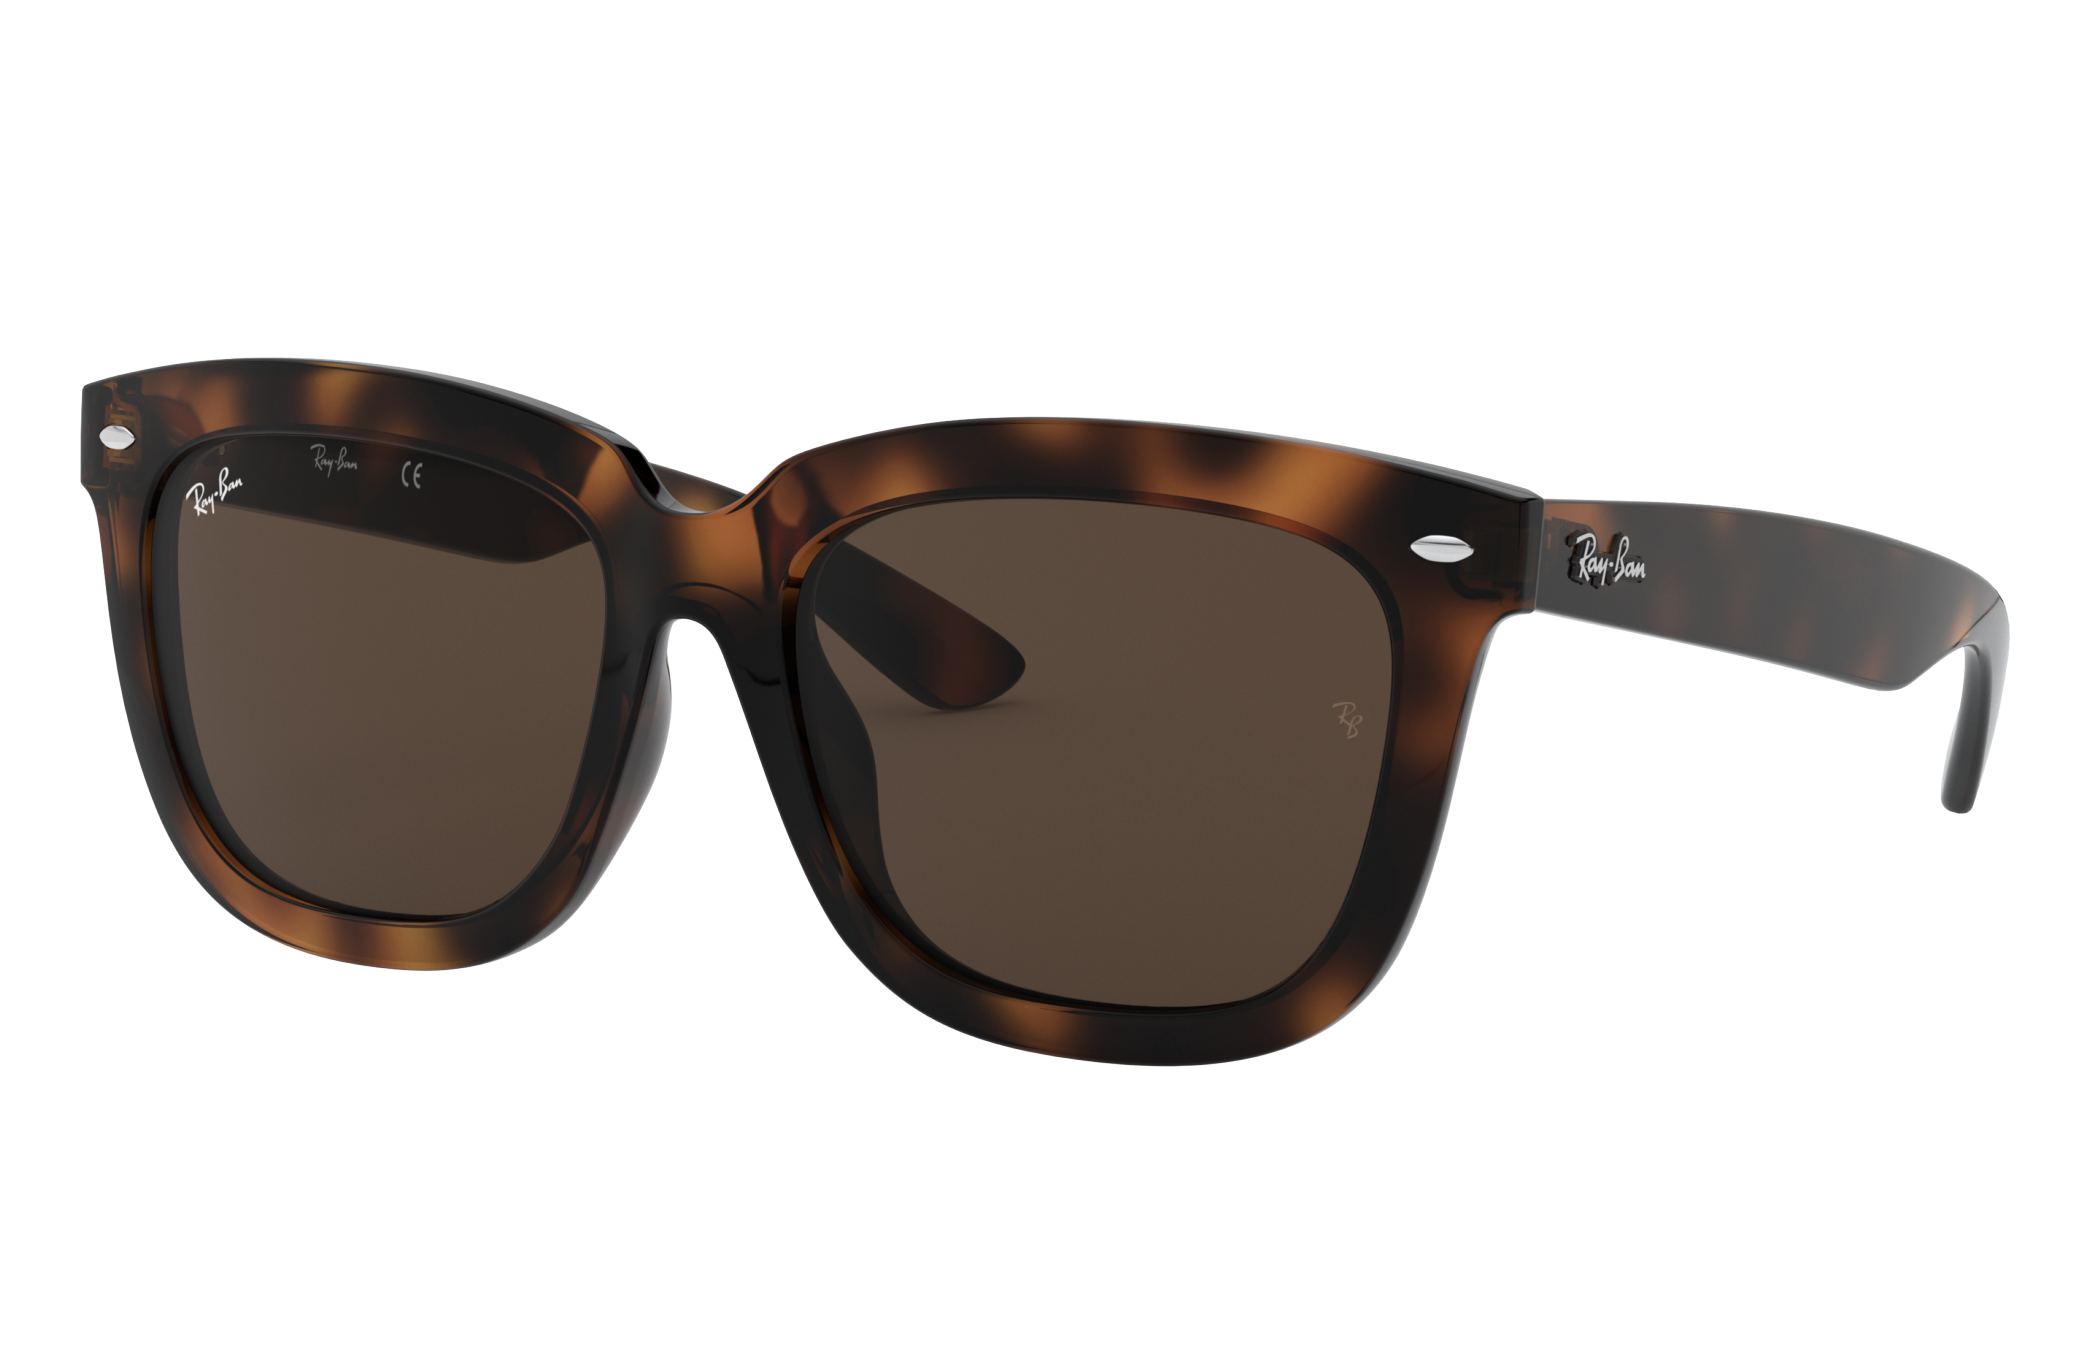 Rb4262d Sunglasses in Havana and Dark Brown - RB4262D | Ray-Ban®